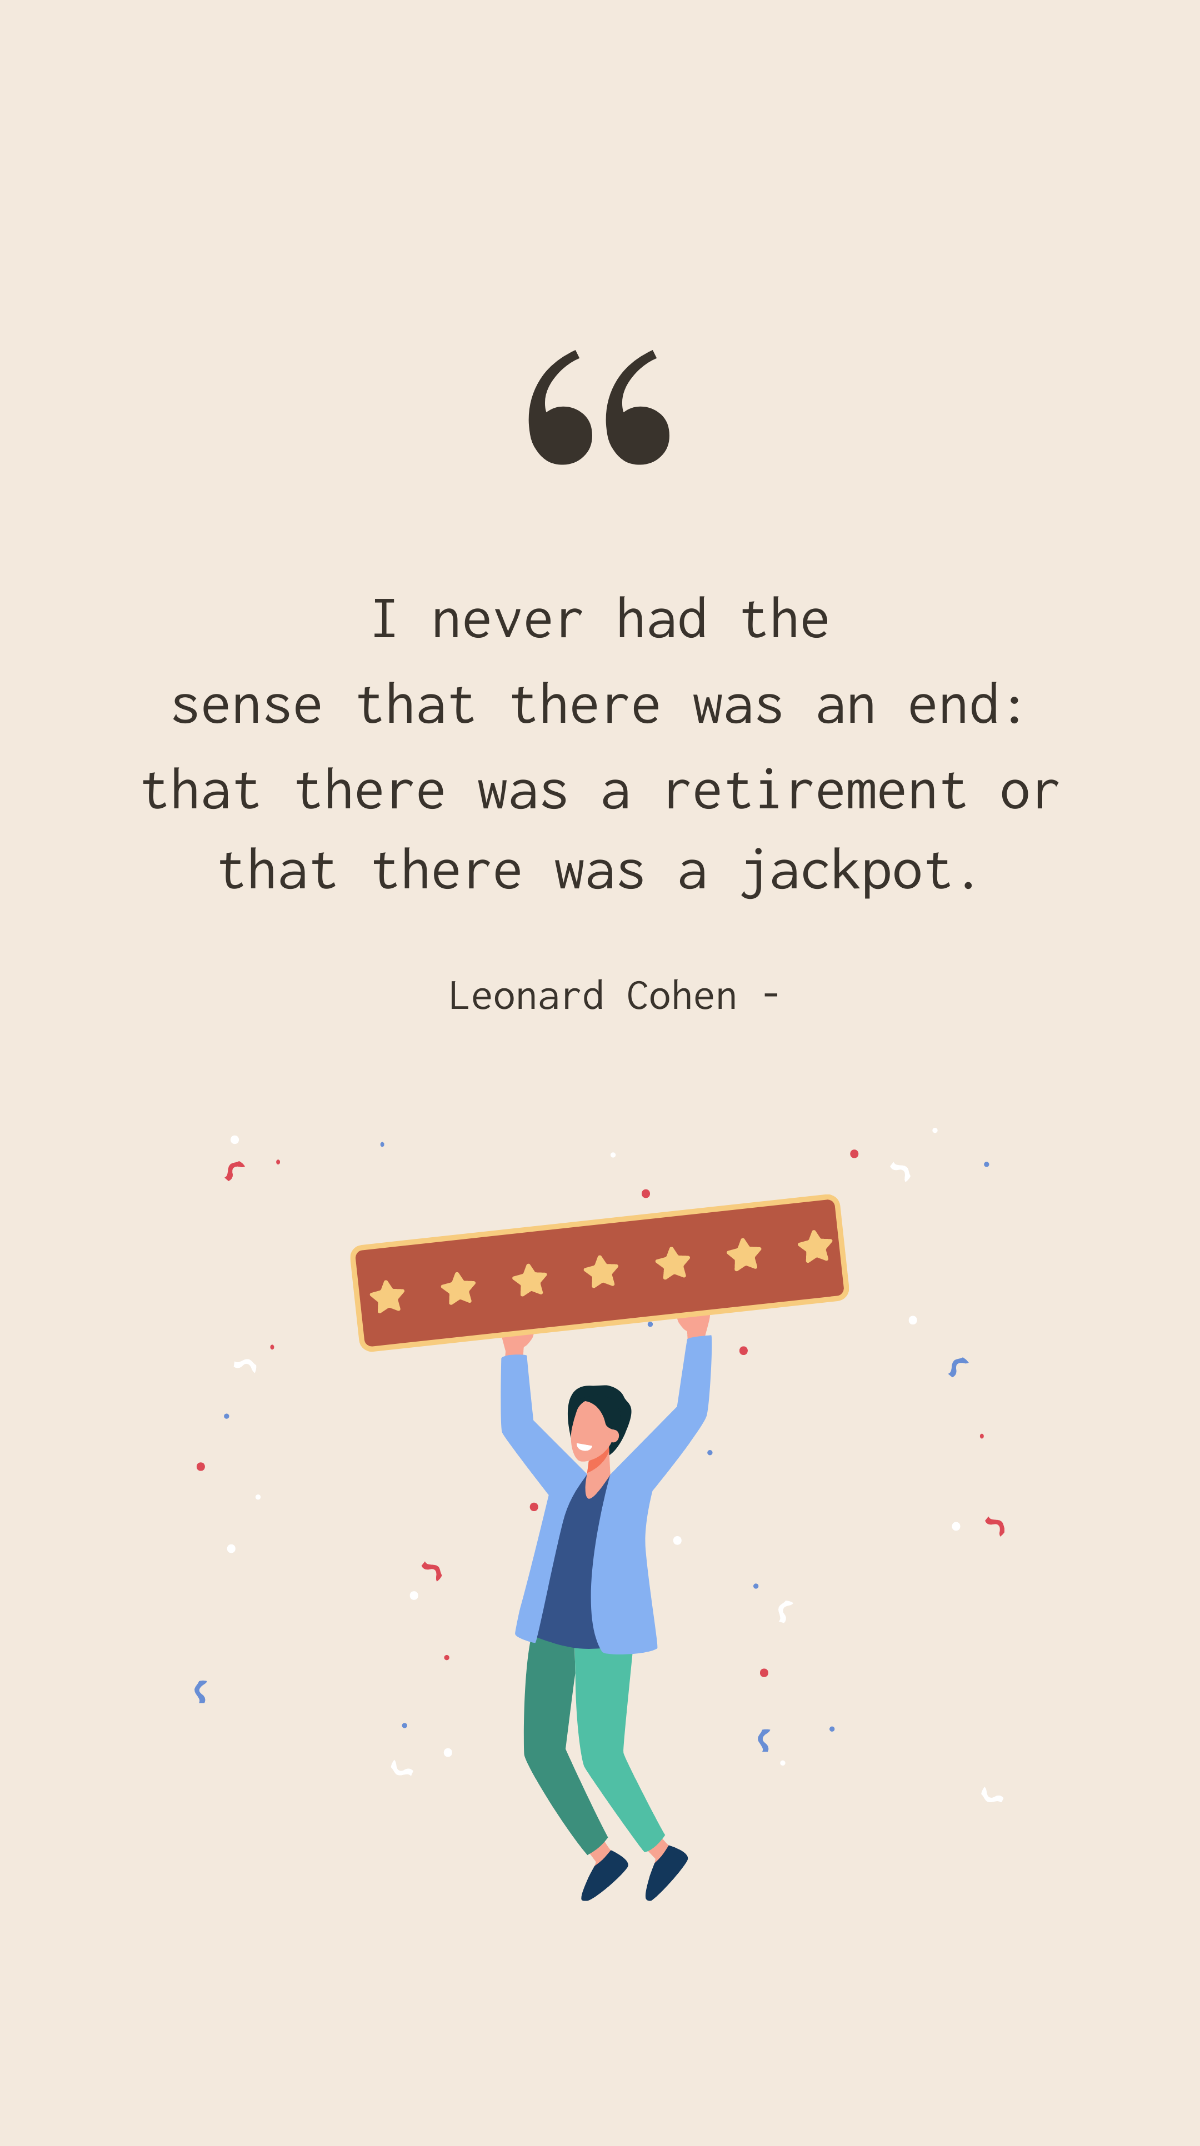 Leonard Cohen - I never had the sense that there was an end: that there was a retirement or that there was a jackpot. Template